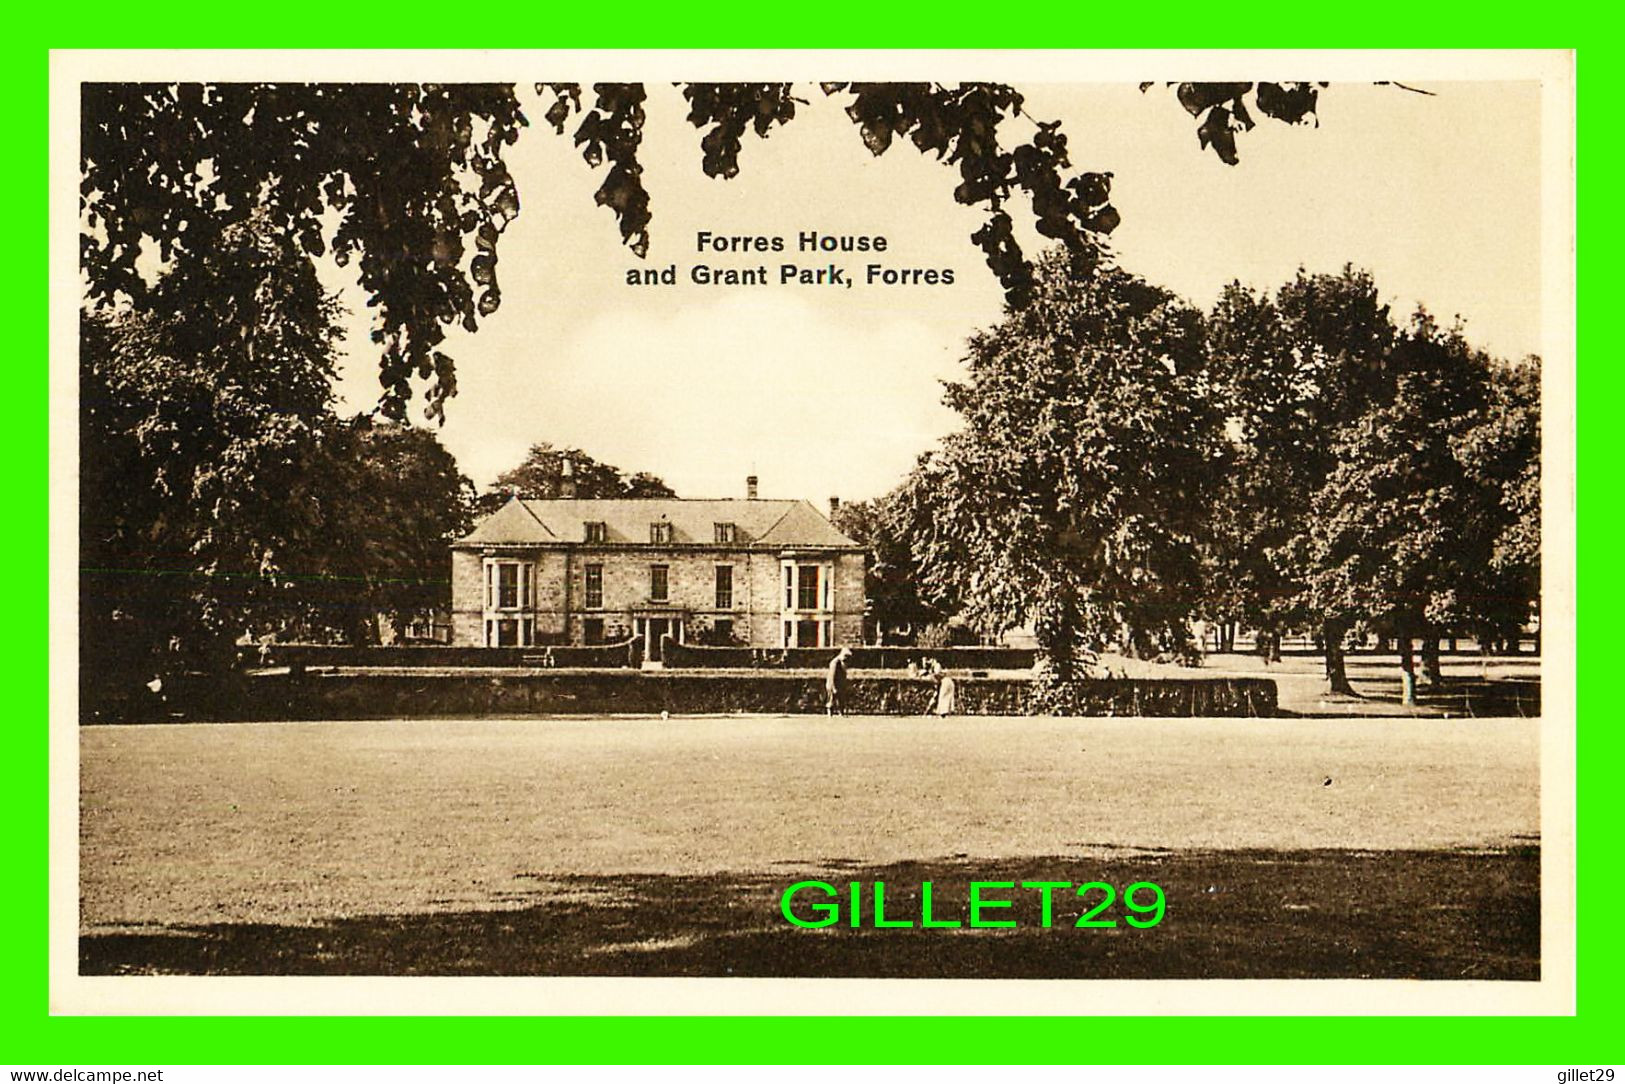 FORRES, SCOTLAND - FORRES HOUSE AND GRANT PARK - ANIMATED PEOPLES -  R. H. ROSS STATIONER - - Moray